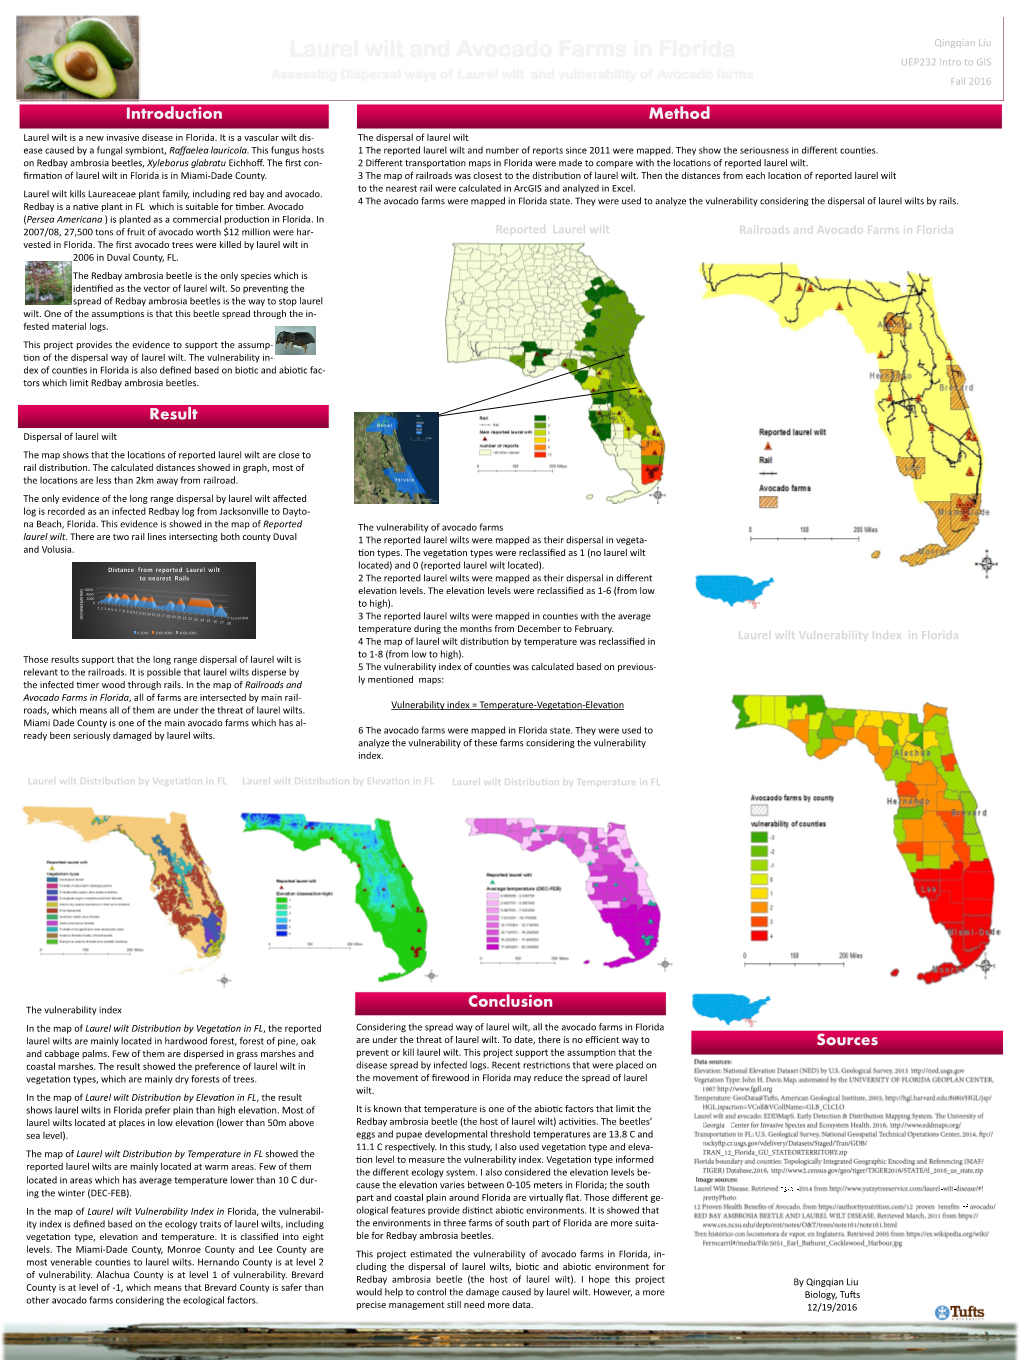 Laurel Wilt and Avocado Farms in Florida UEP232 Intro to GIS Assessing Dispersal Ways of Laurel Wilt and Vulnerability of Avocado Farms Fall 2016